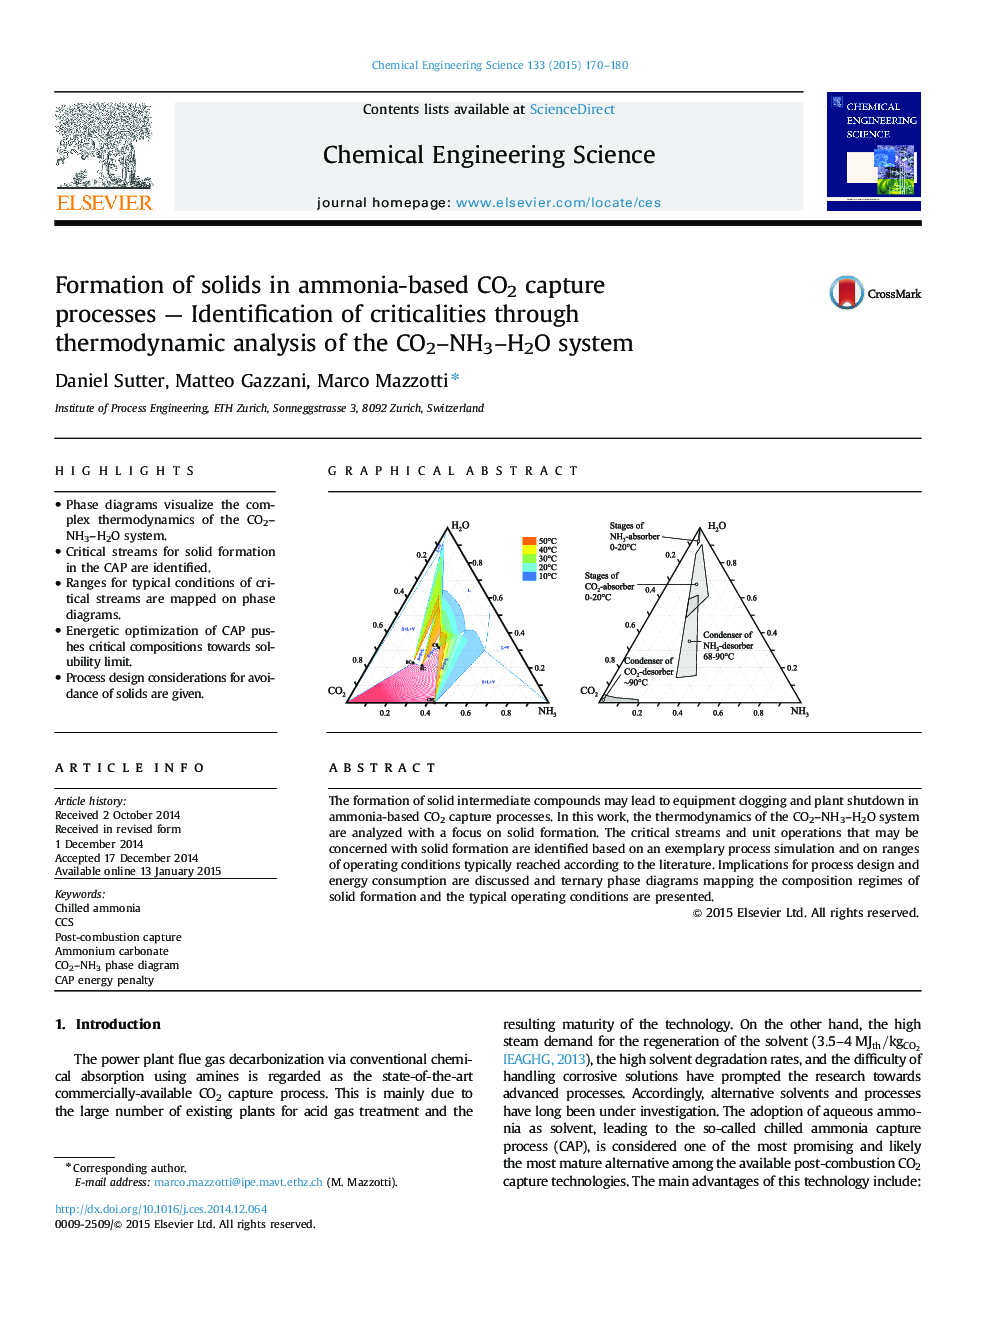 Formation of solids in ammonia-based CO2 capture processes - Identification of criticalities through thermodynamic analysis of the CO2-NH3-H2O system